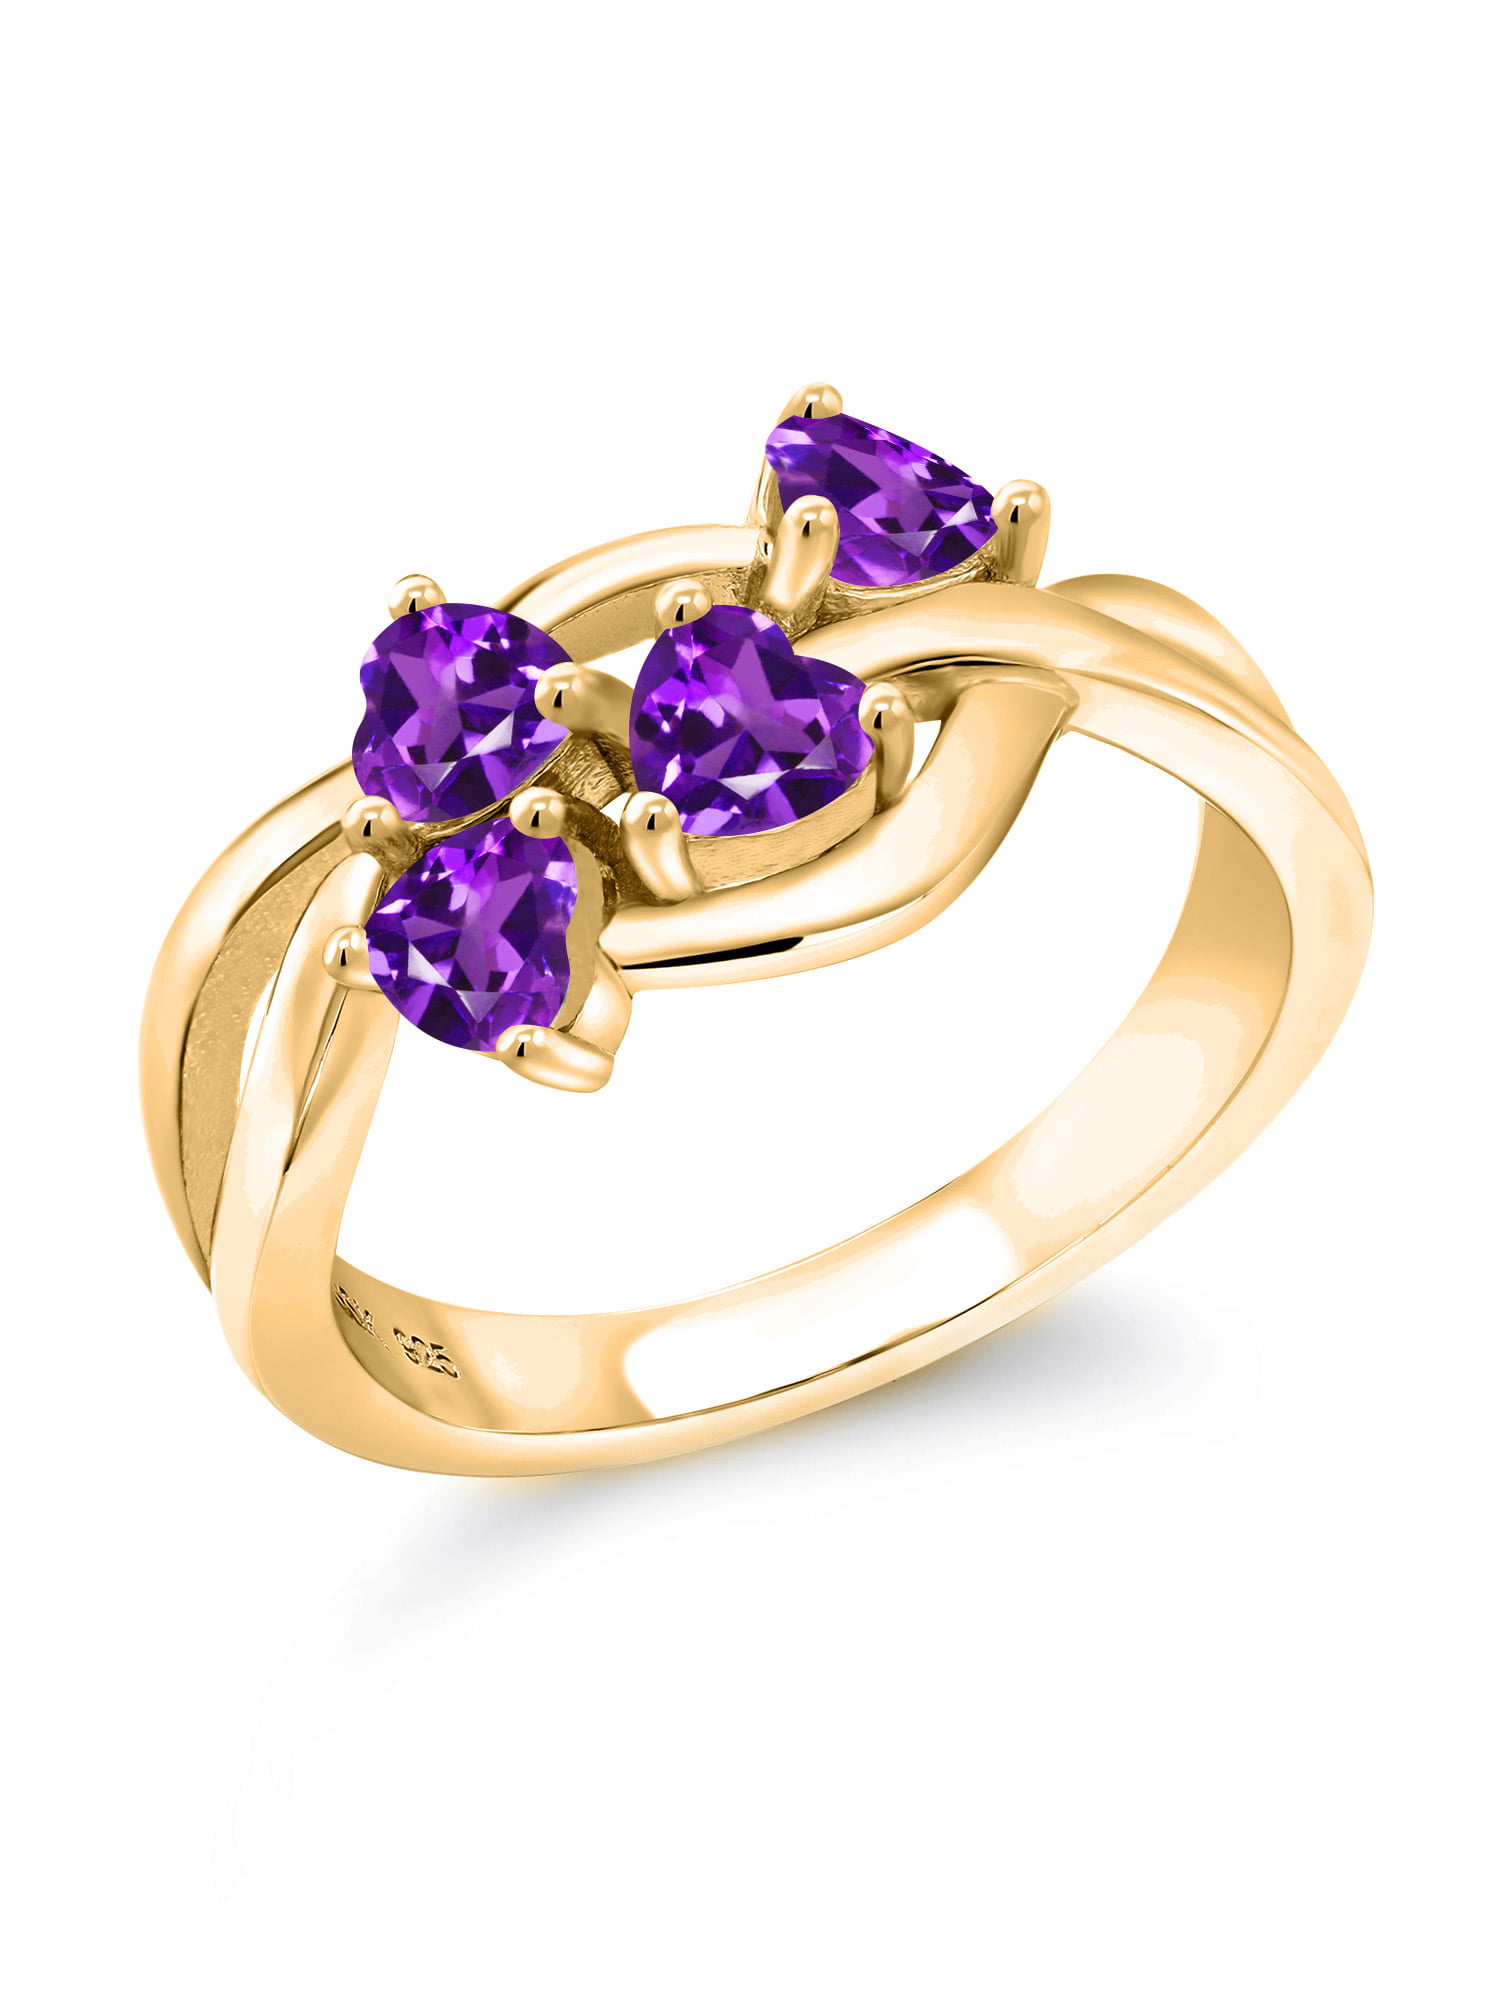 5.19 Ct Heart Shape Purple Amethyst 18K Yellow Gold Plated Silver Ring